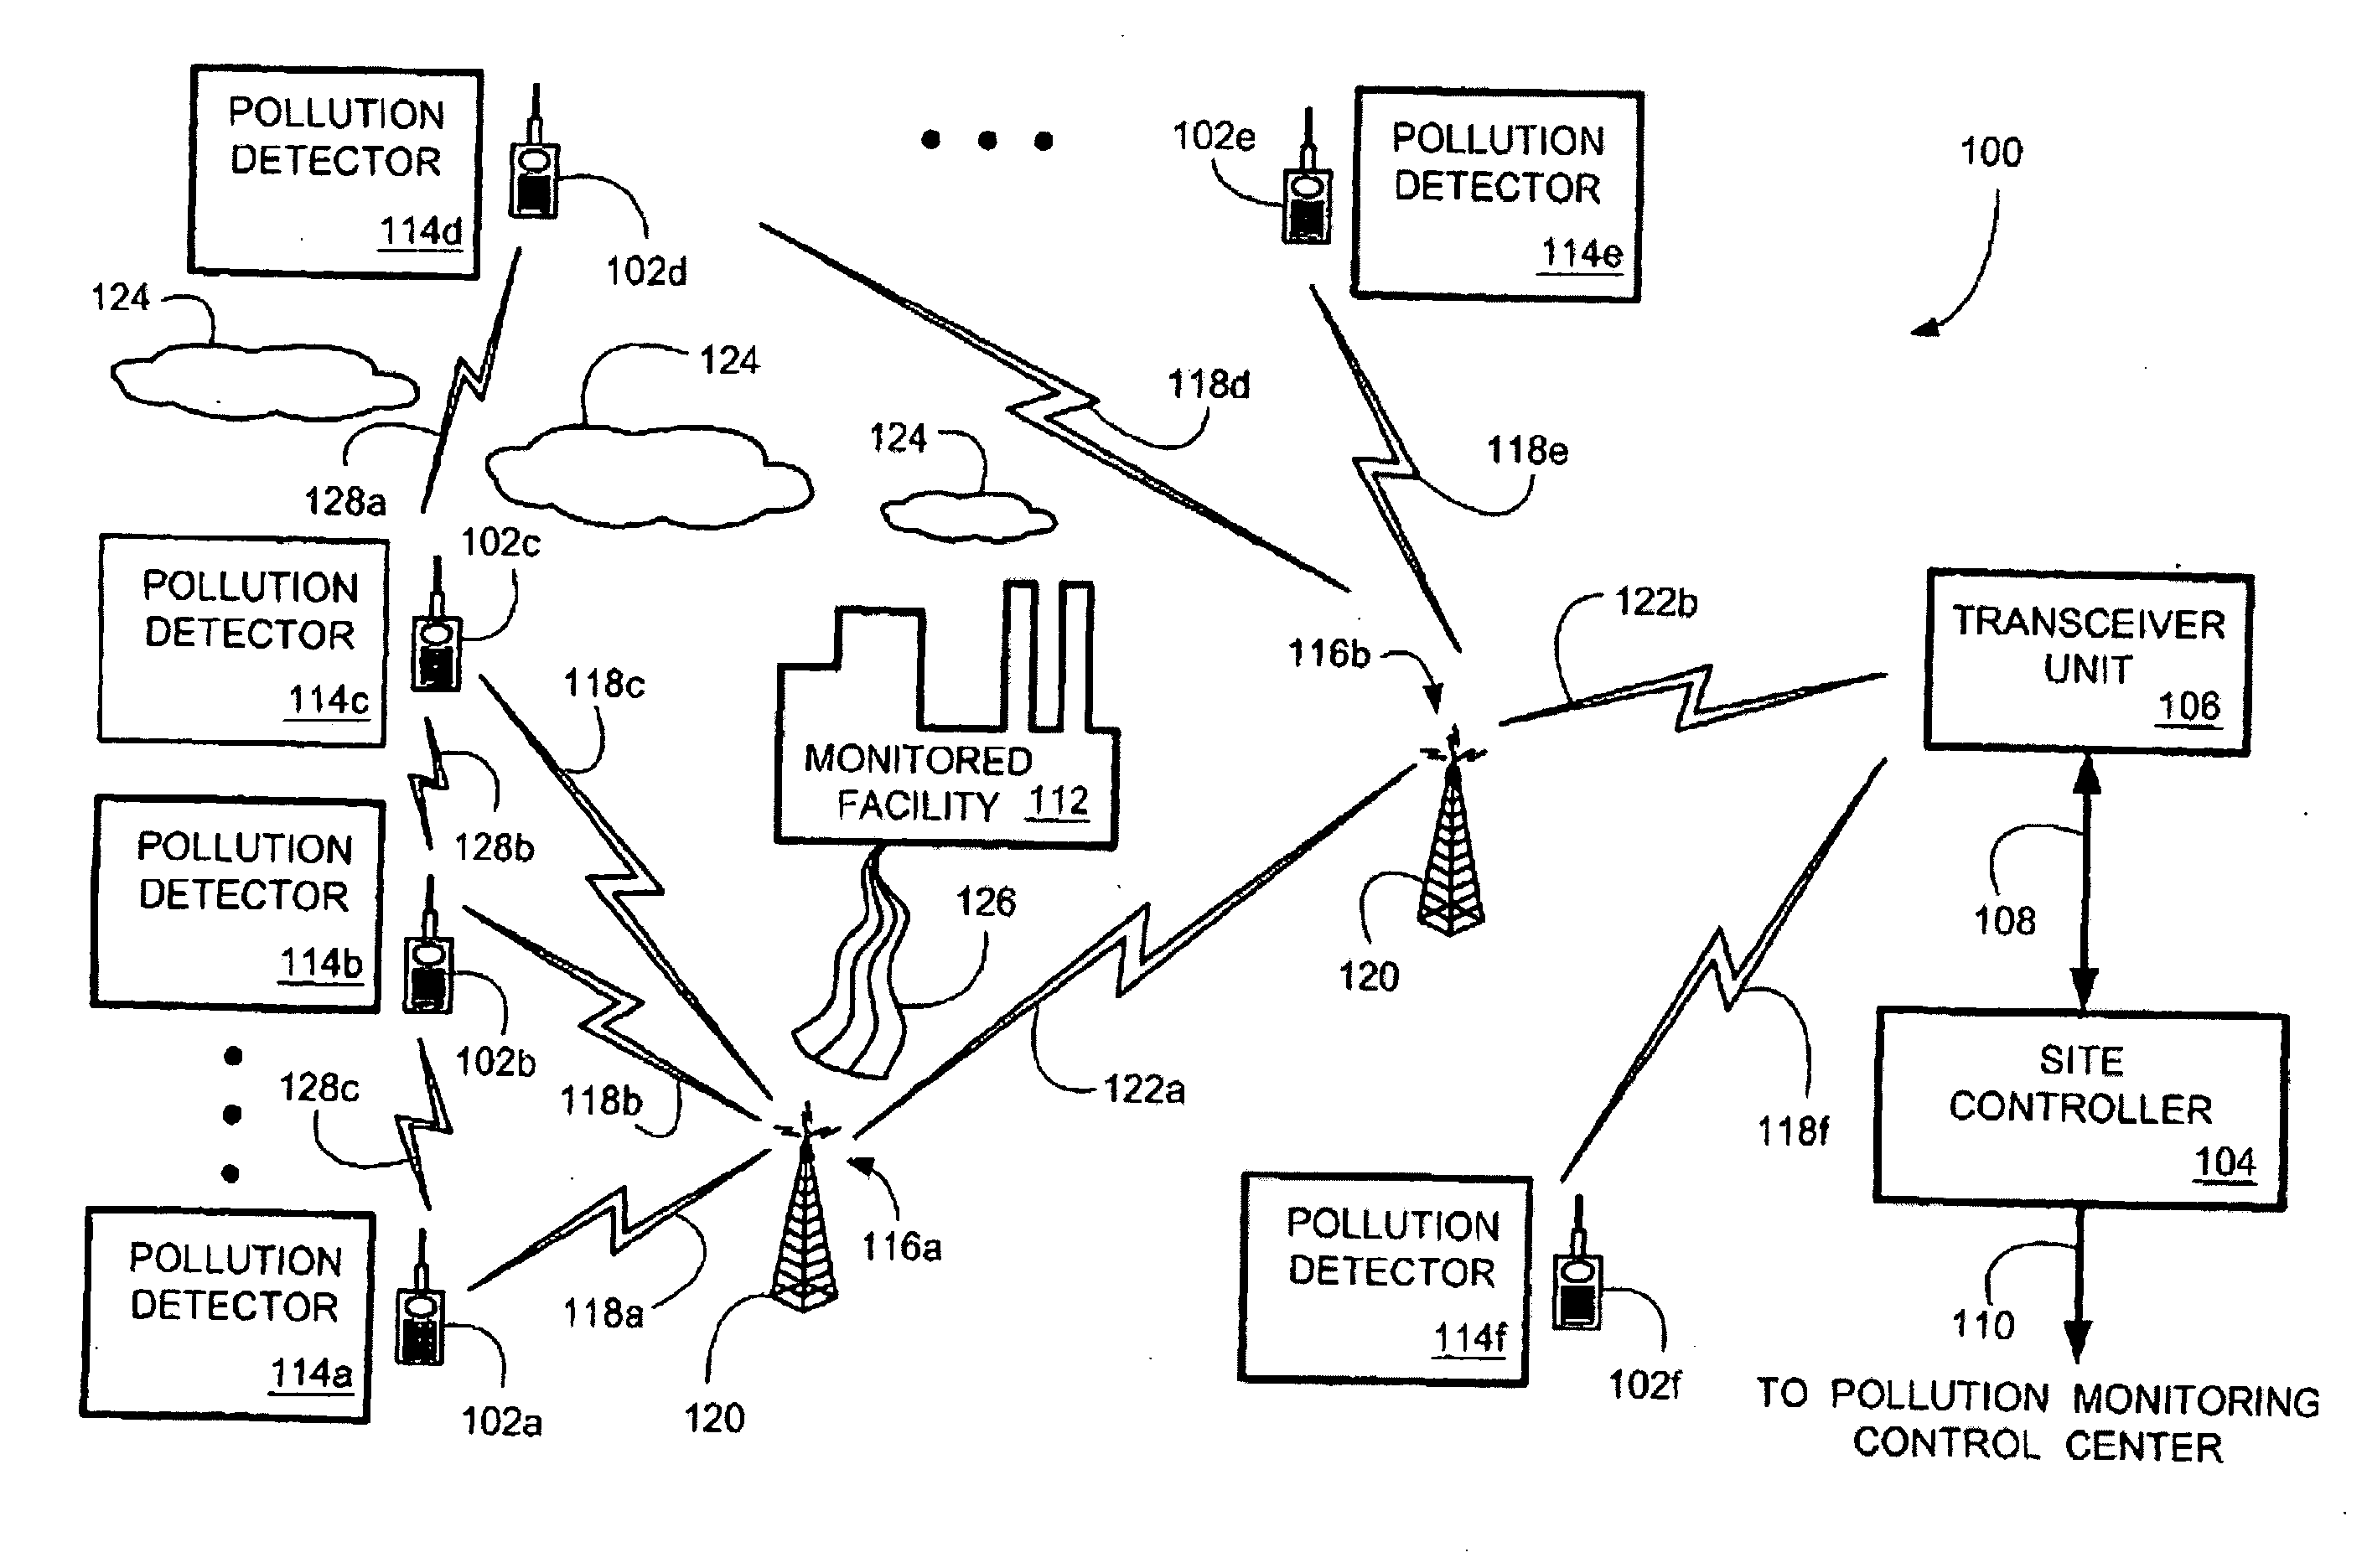 System And Method For Transmitting Pollution Information Over An Integrated Wireless Network